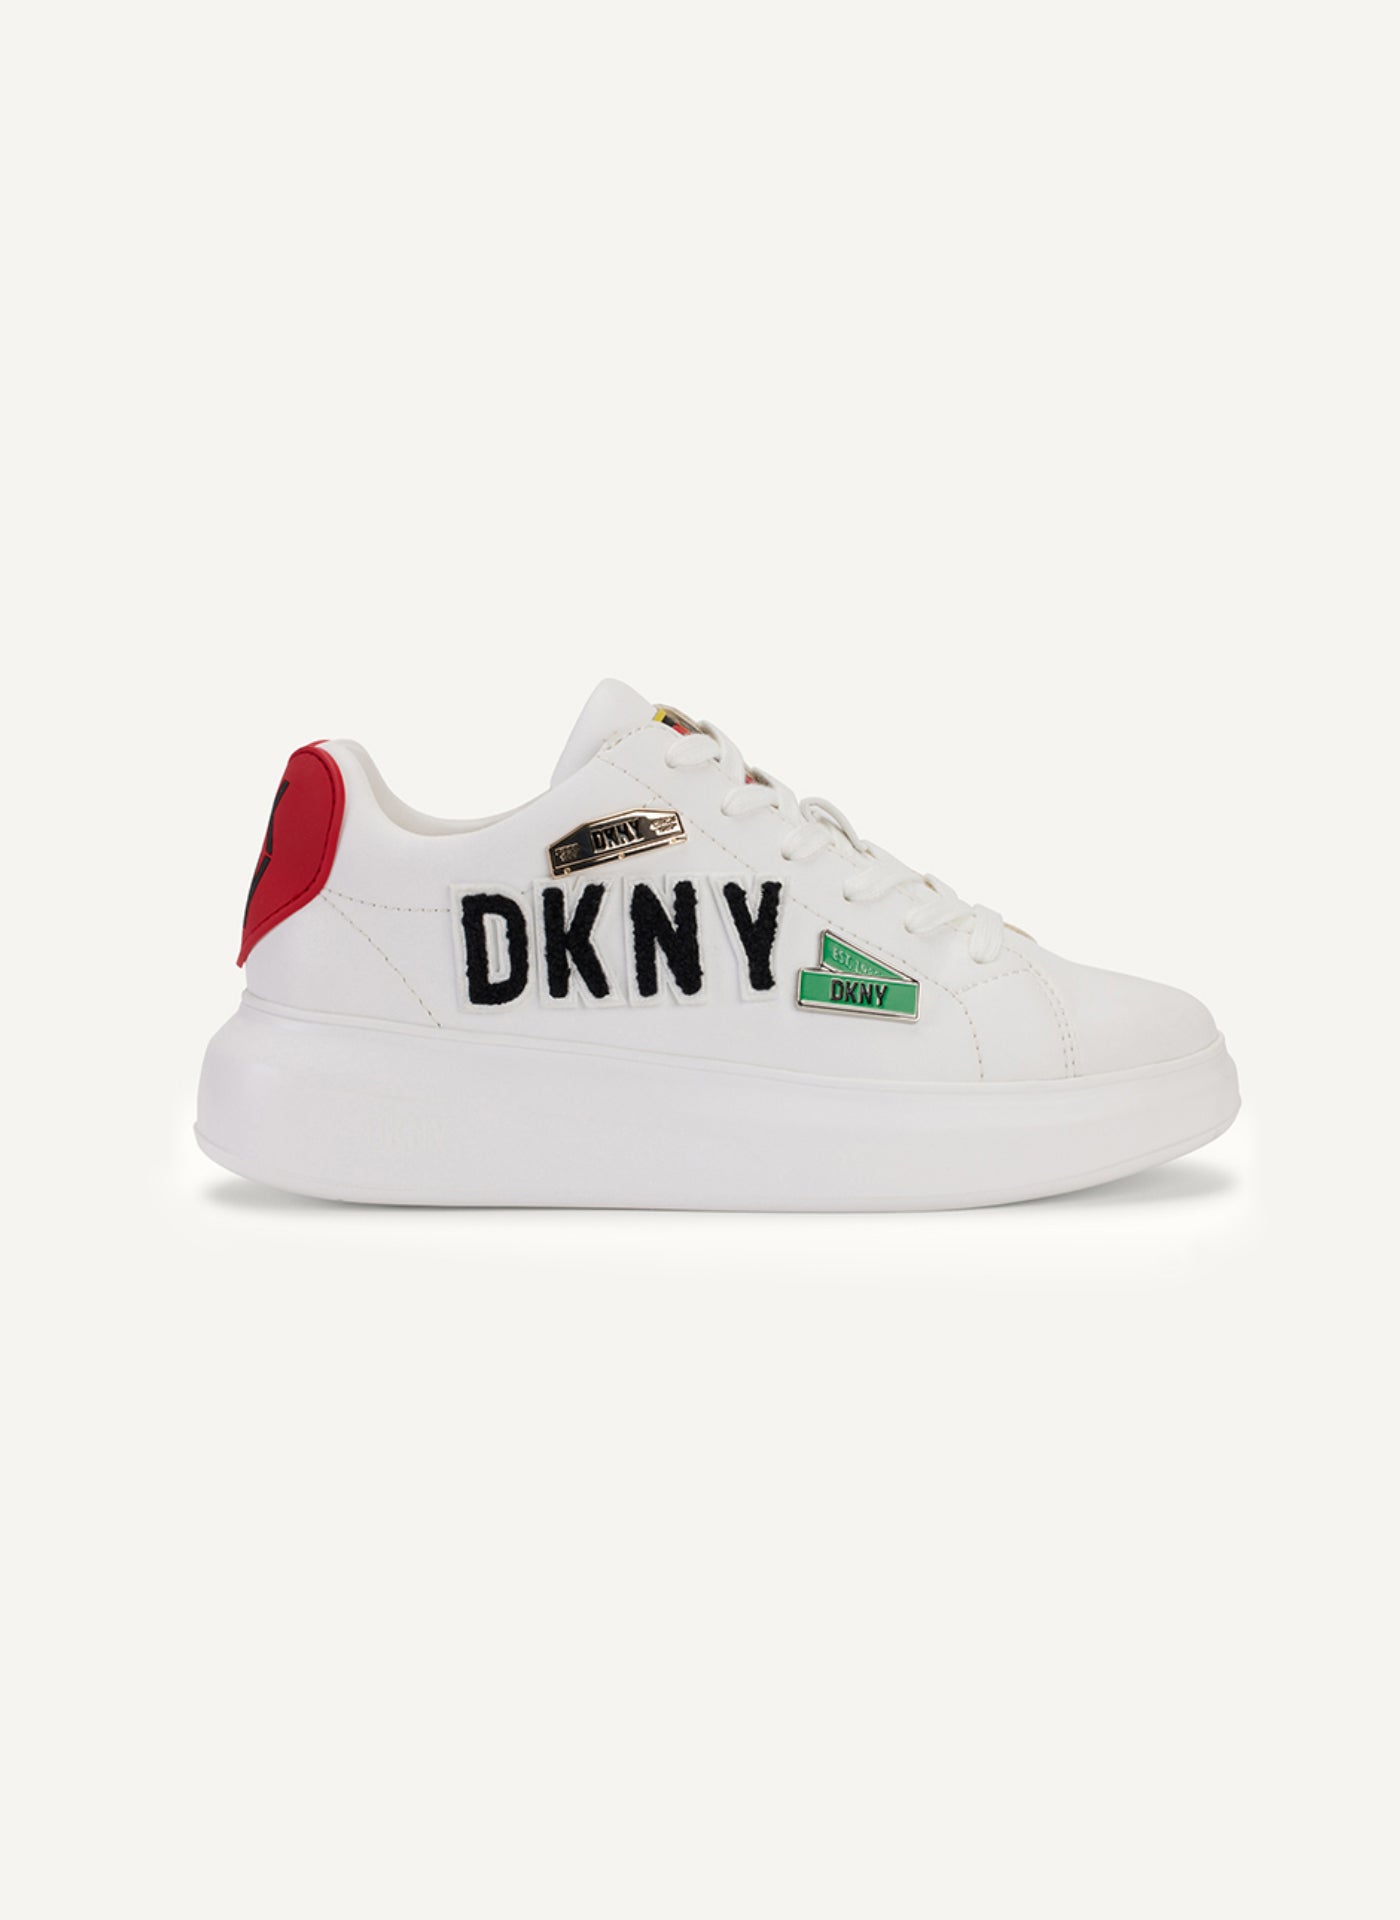 DKNY JEWEL CITY SIGNS LACE UP SNEAKER,White